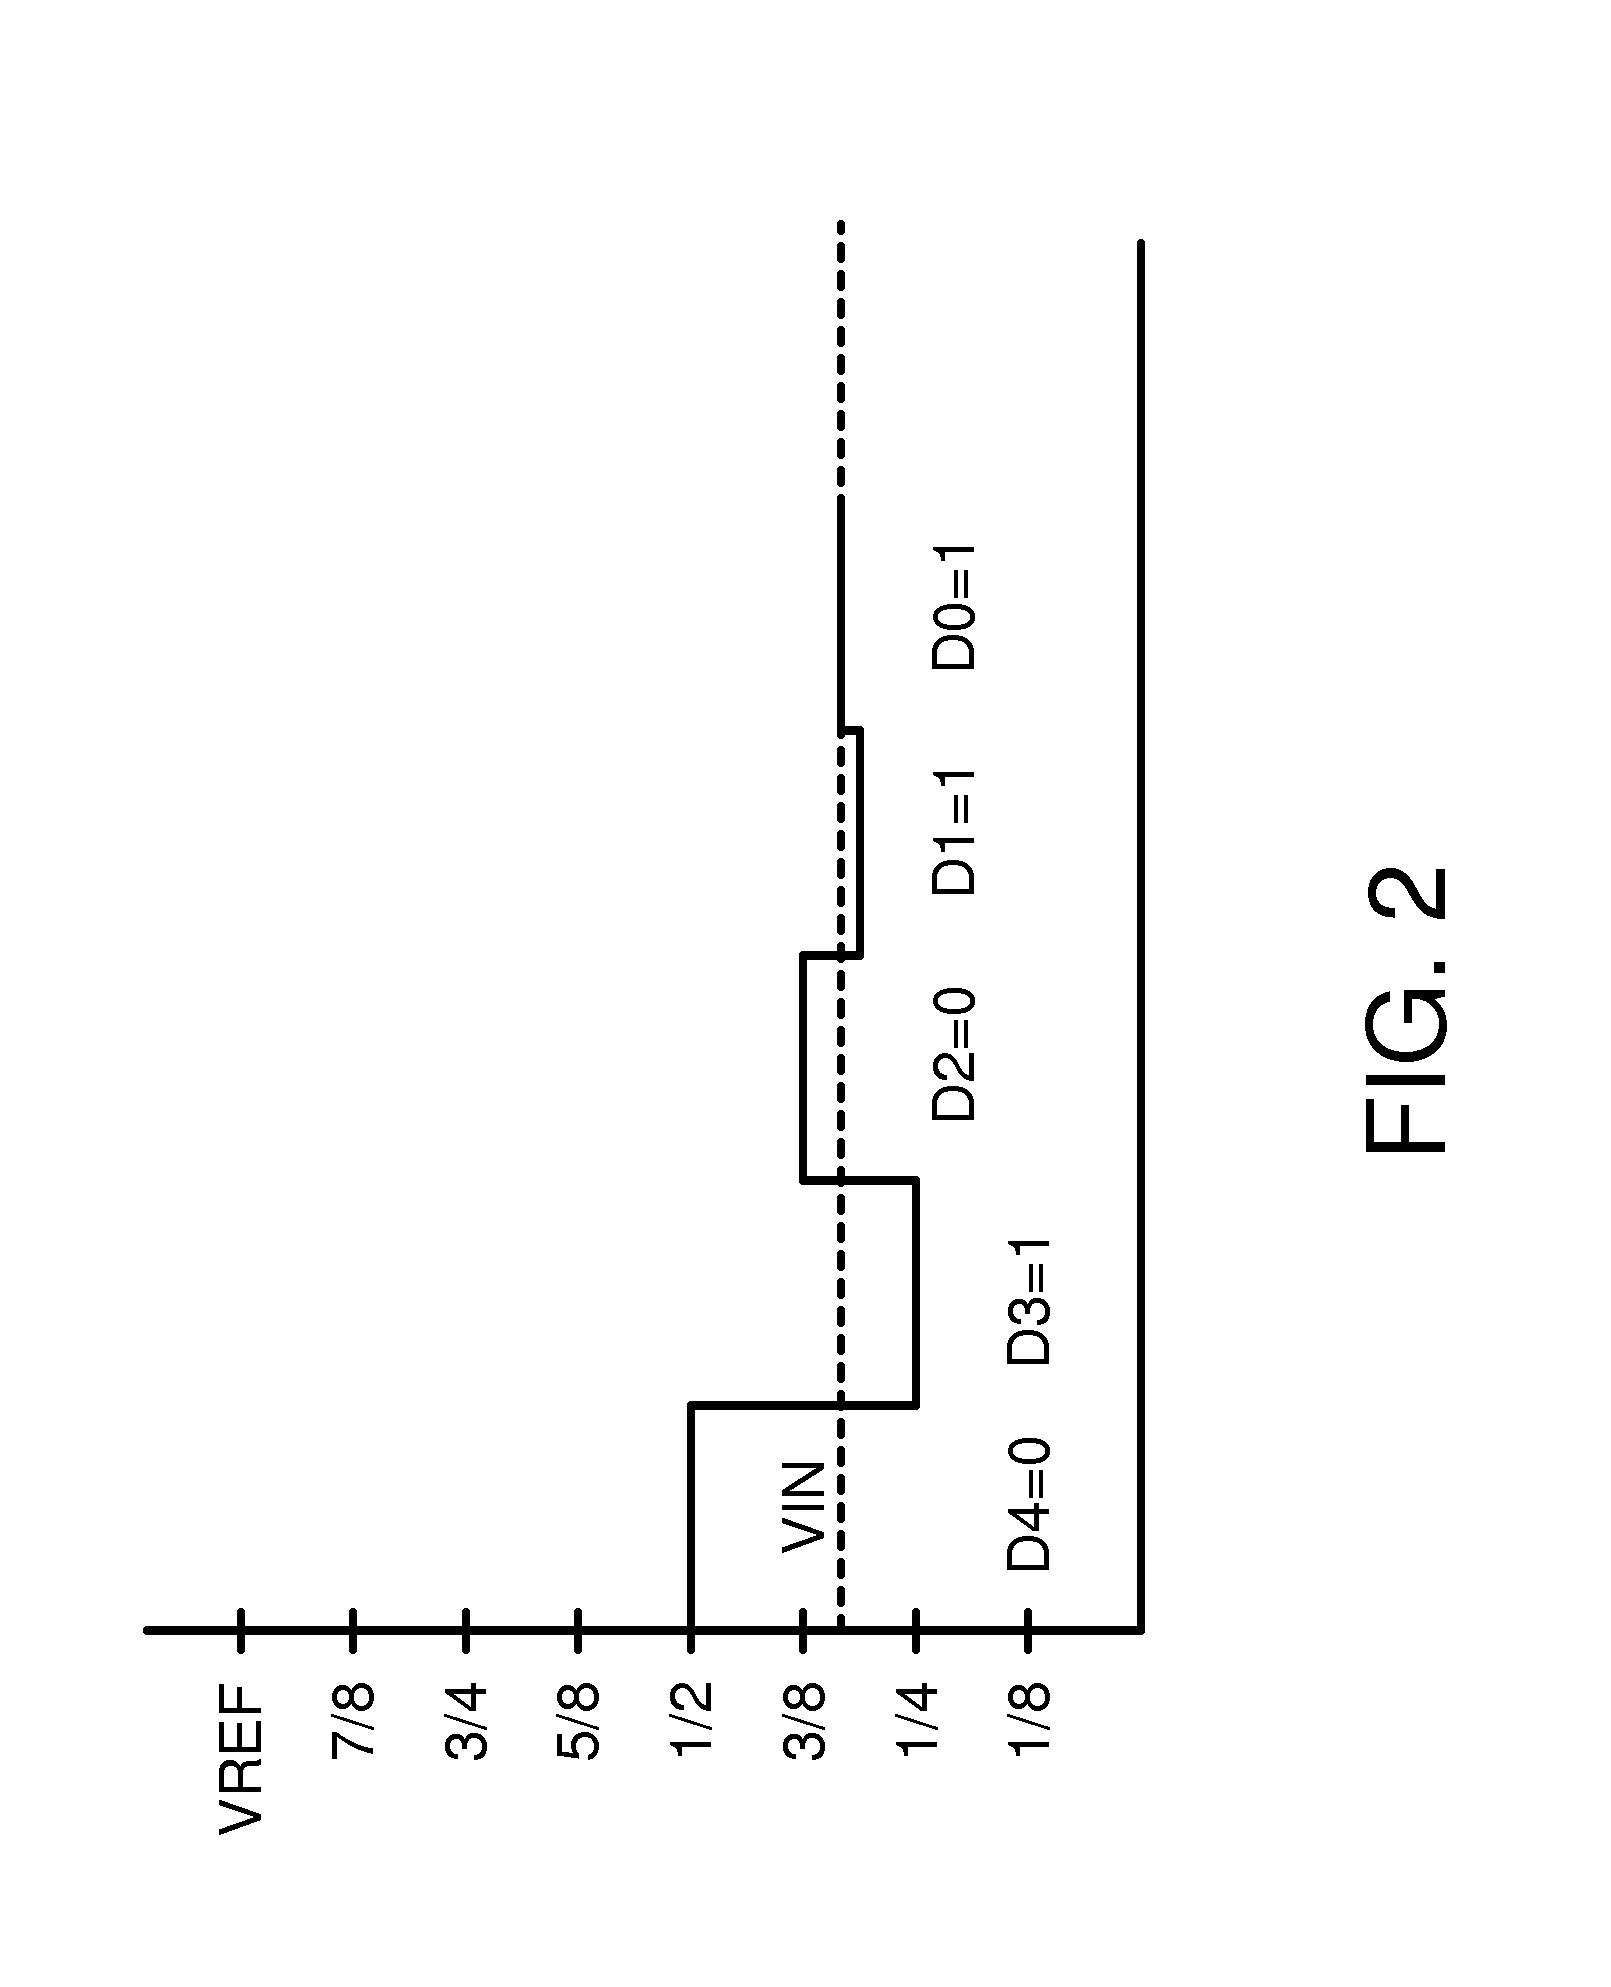 Loading-free multi-stage SAR-assisted pipeline ADC that eliminates amplifier load by re-using second-stage switched capacitors as amplifier feedback capacitor